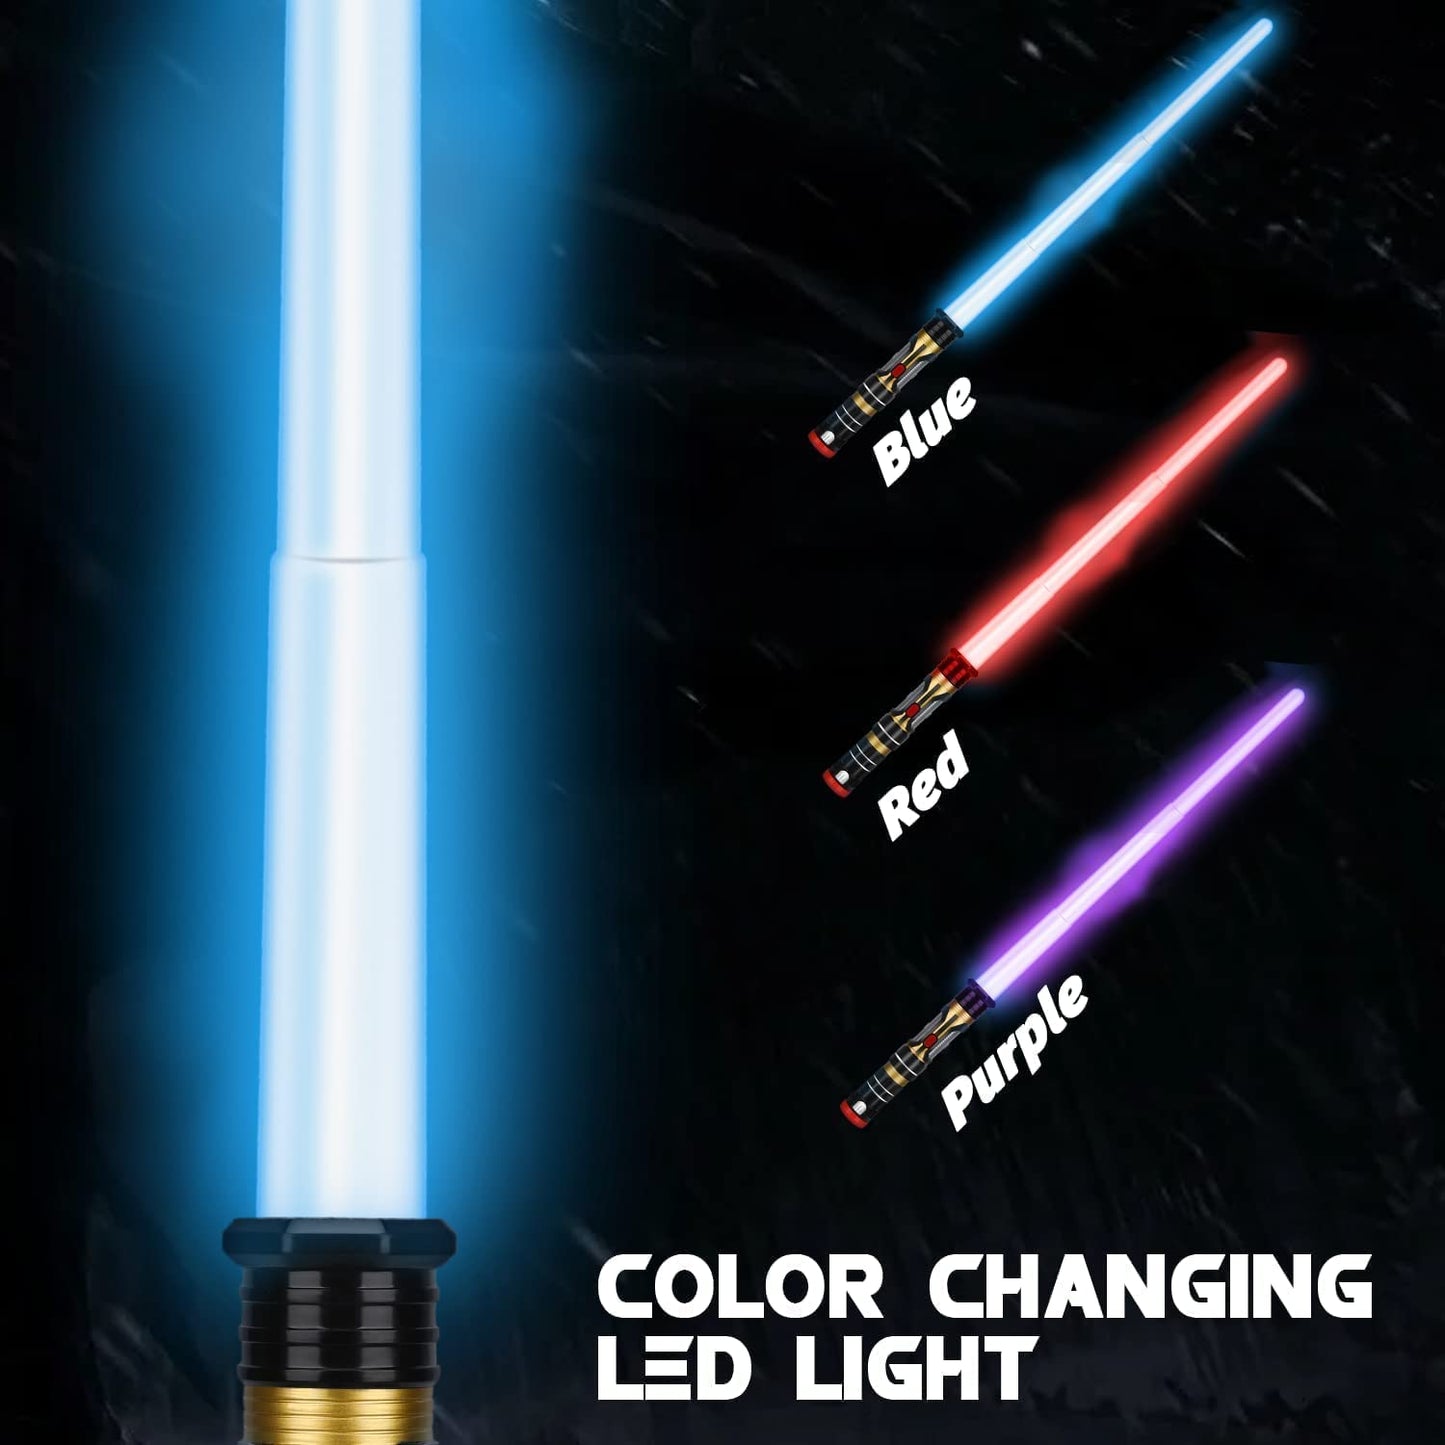 Light Saber Kids - Light up Saber with Sound- 3 Colors Changeable Retractable Lightsaber Sword Toys for Boys Kids Gift Party Favors - 1 Pack